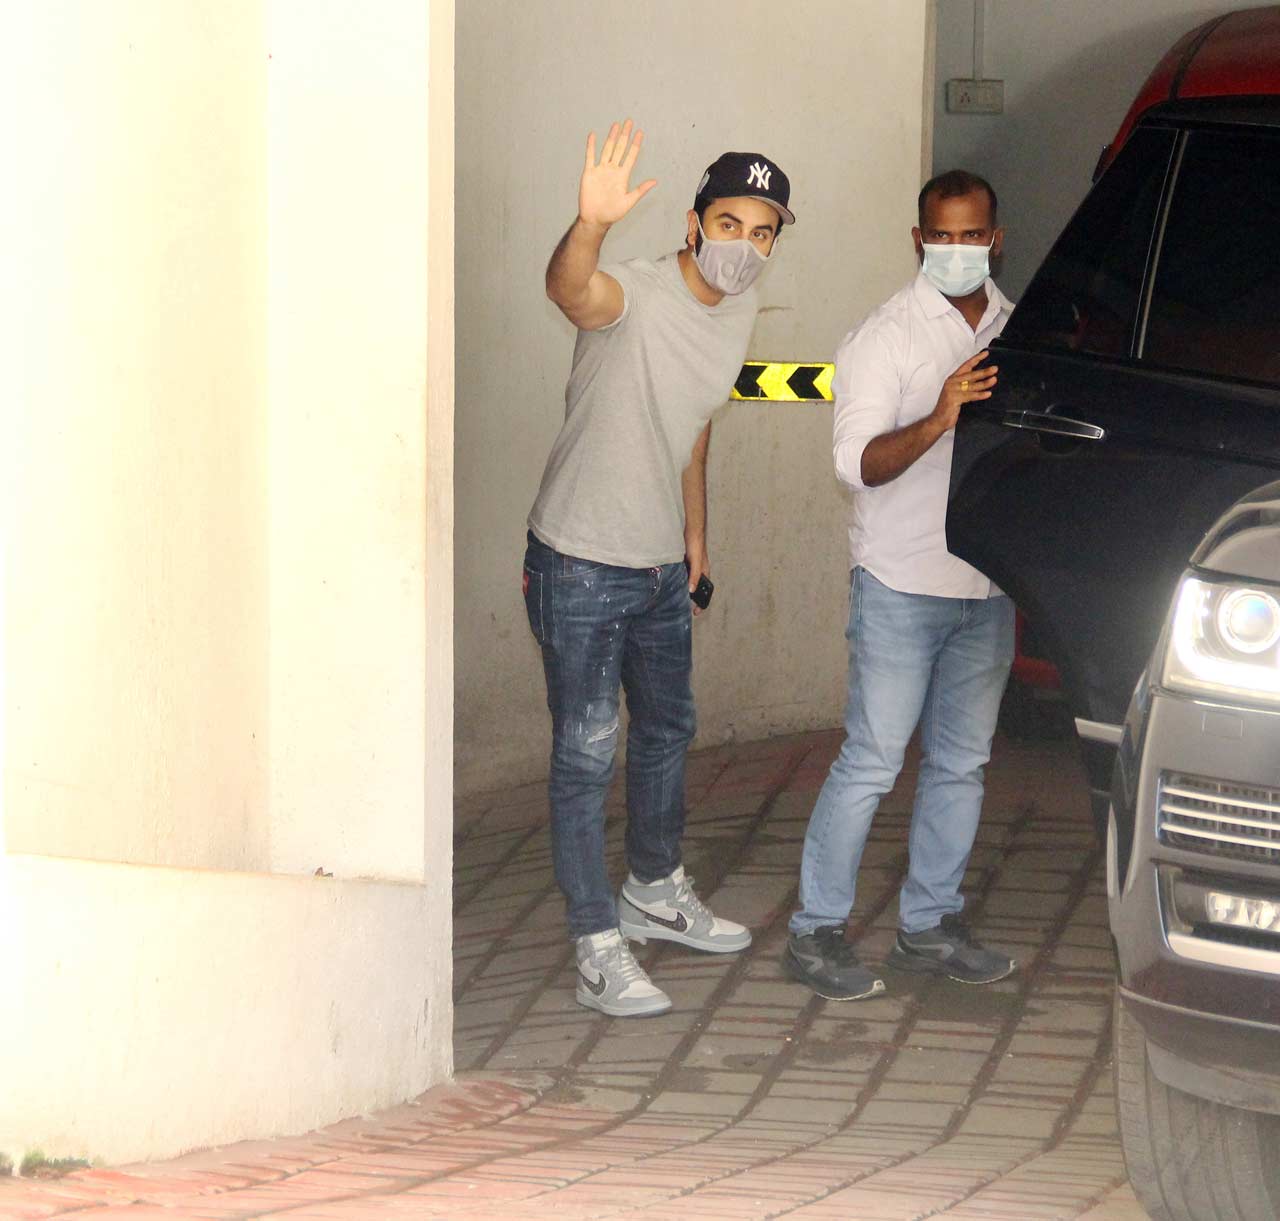 Ranbir Kapoor, who recently recovered from COVID-19, waved at the paparazzi when clicked in Mumbai. On the work front, he will be next seen in Shamshera and Brahmastra.